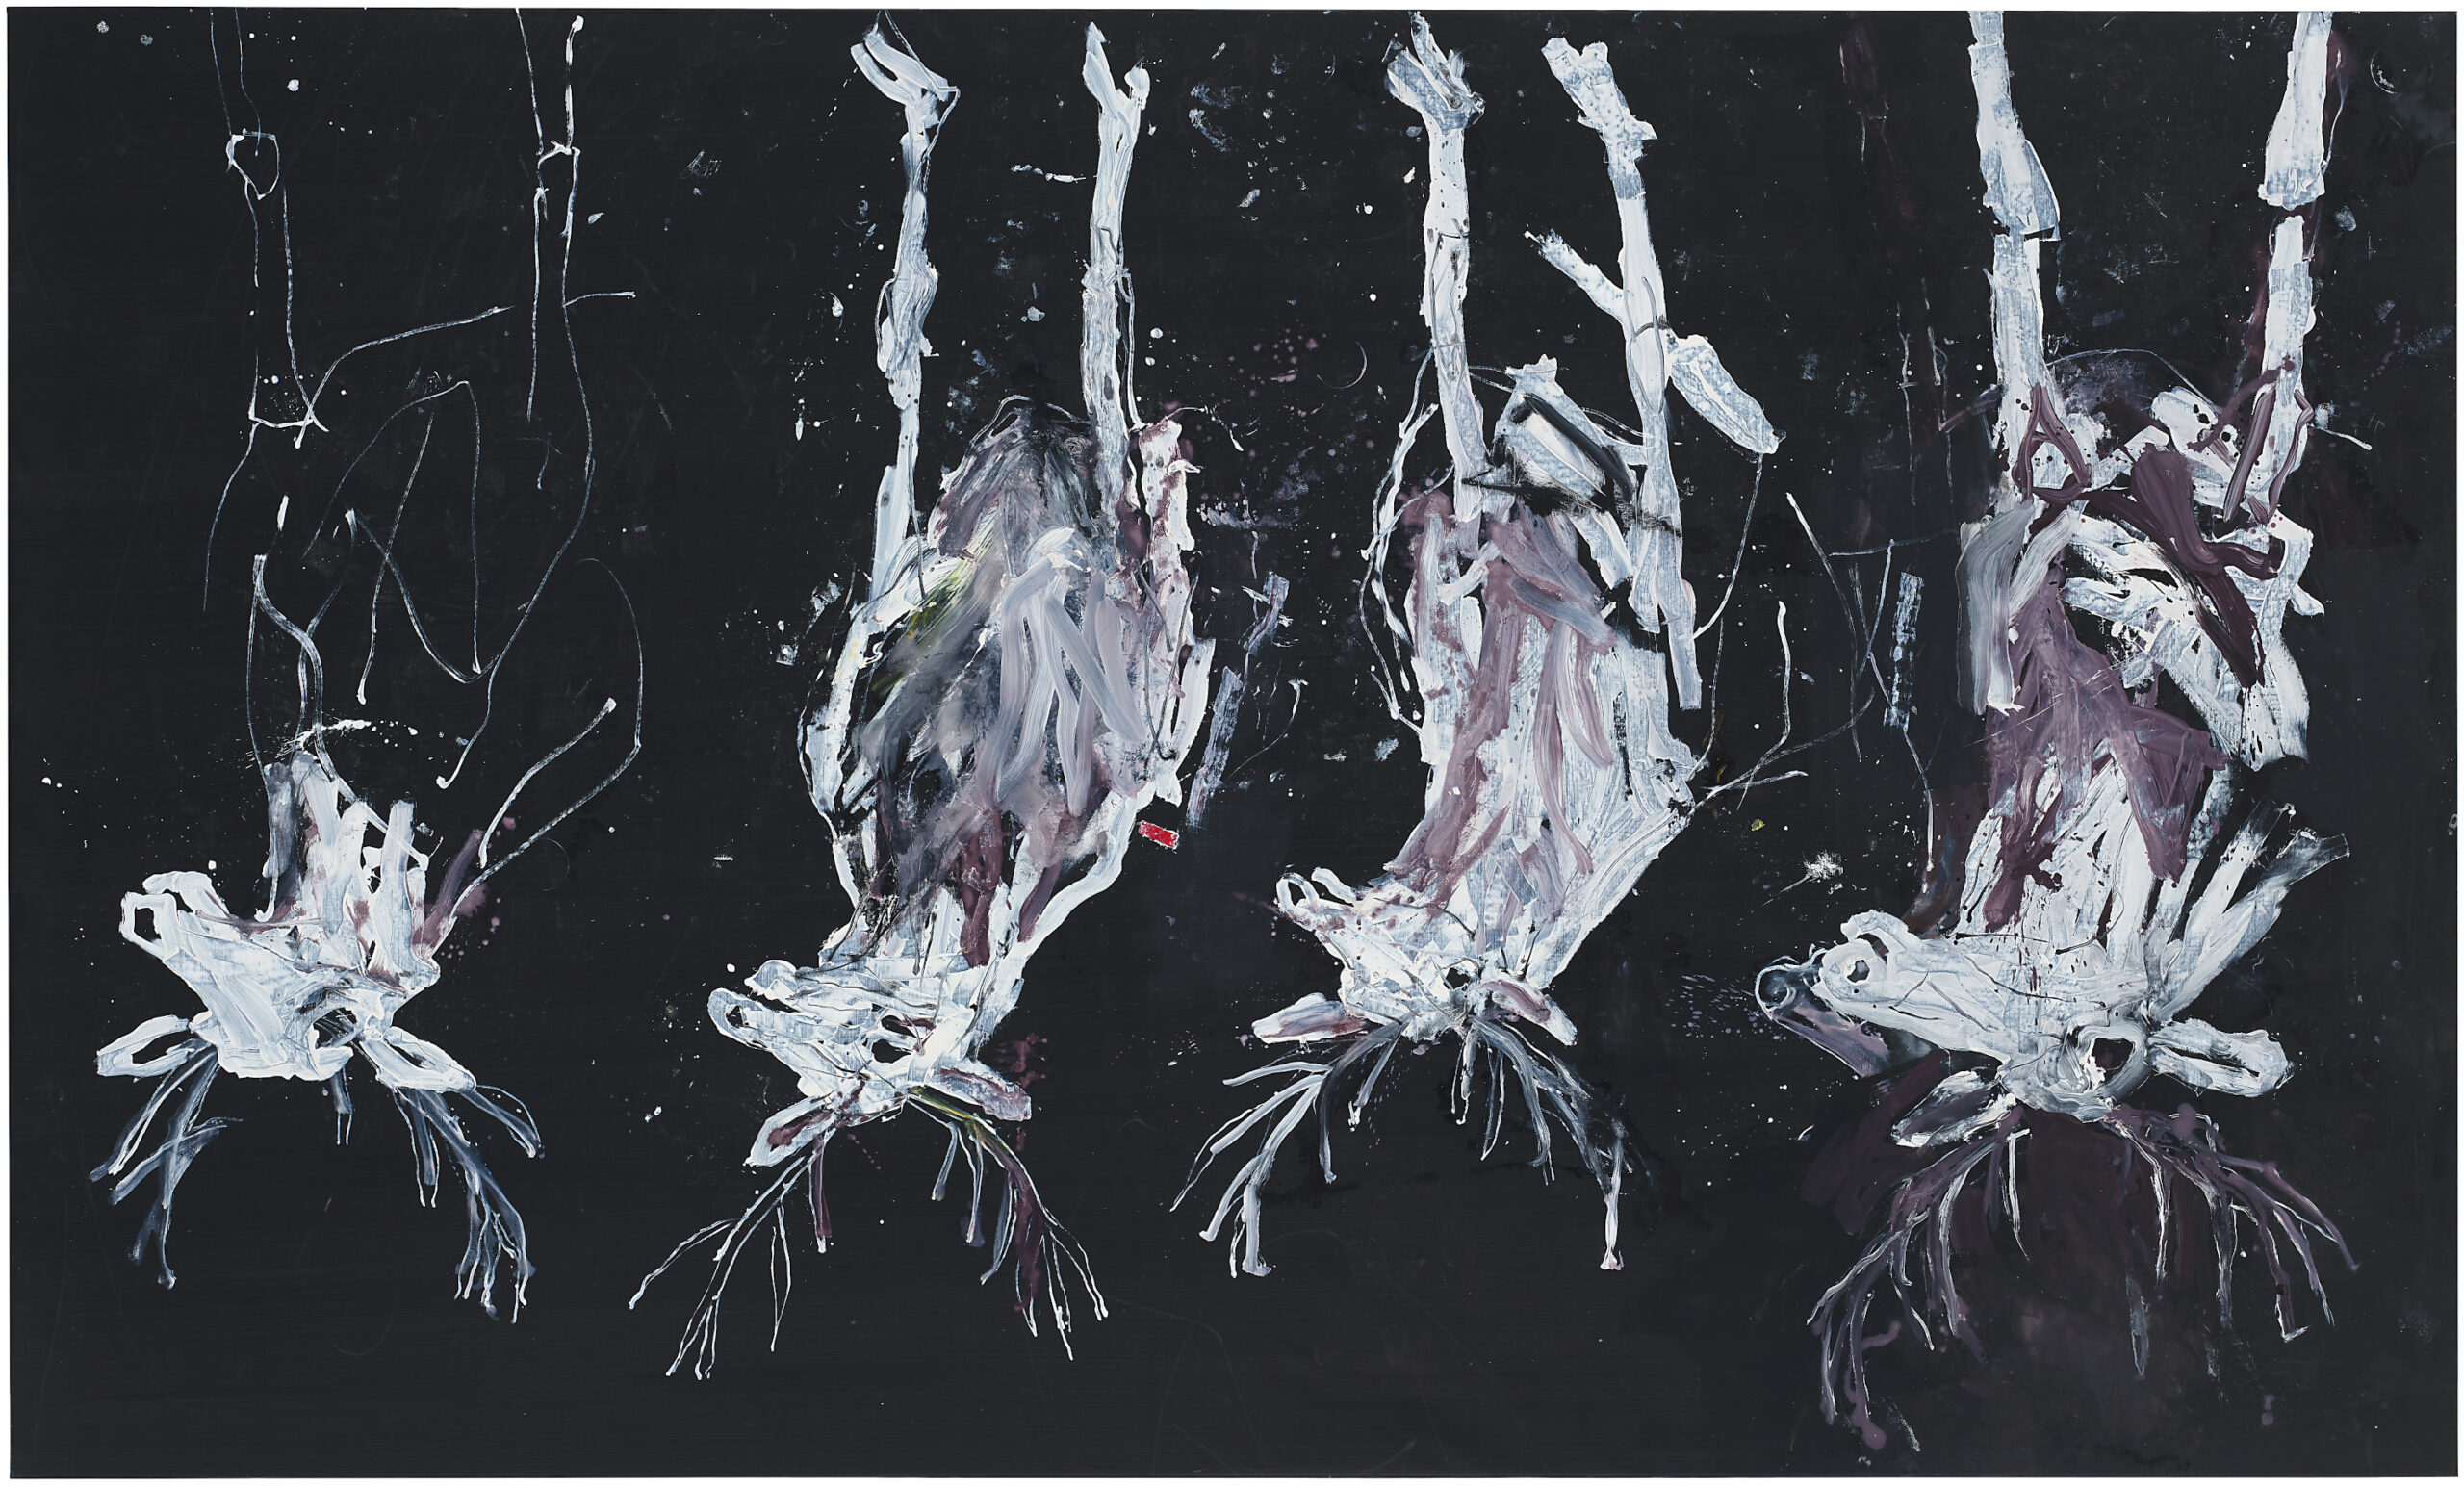 “The Painter in His Bed”: Georg Baselitz’s New Exhibition at Gagosian New York